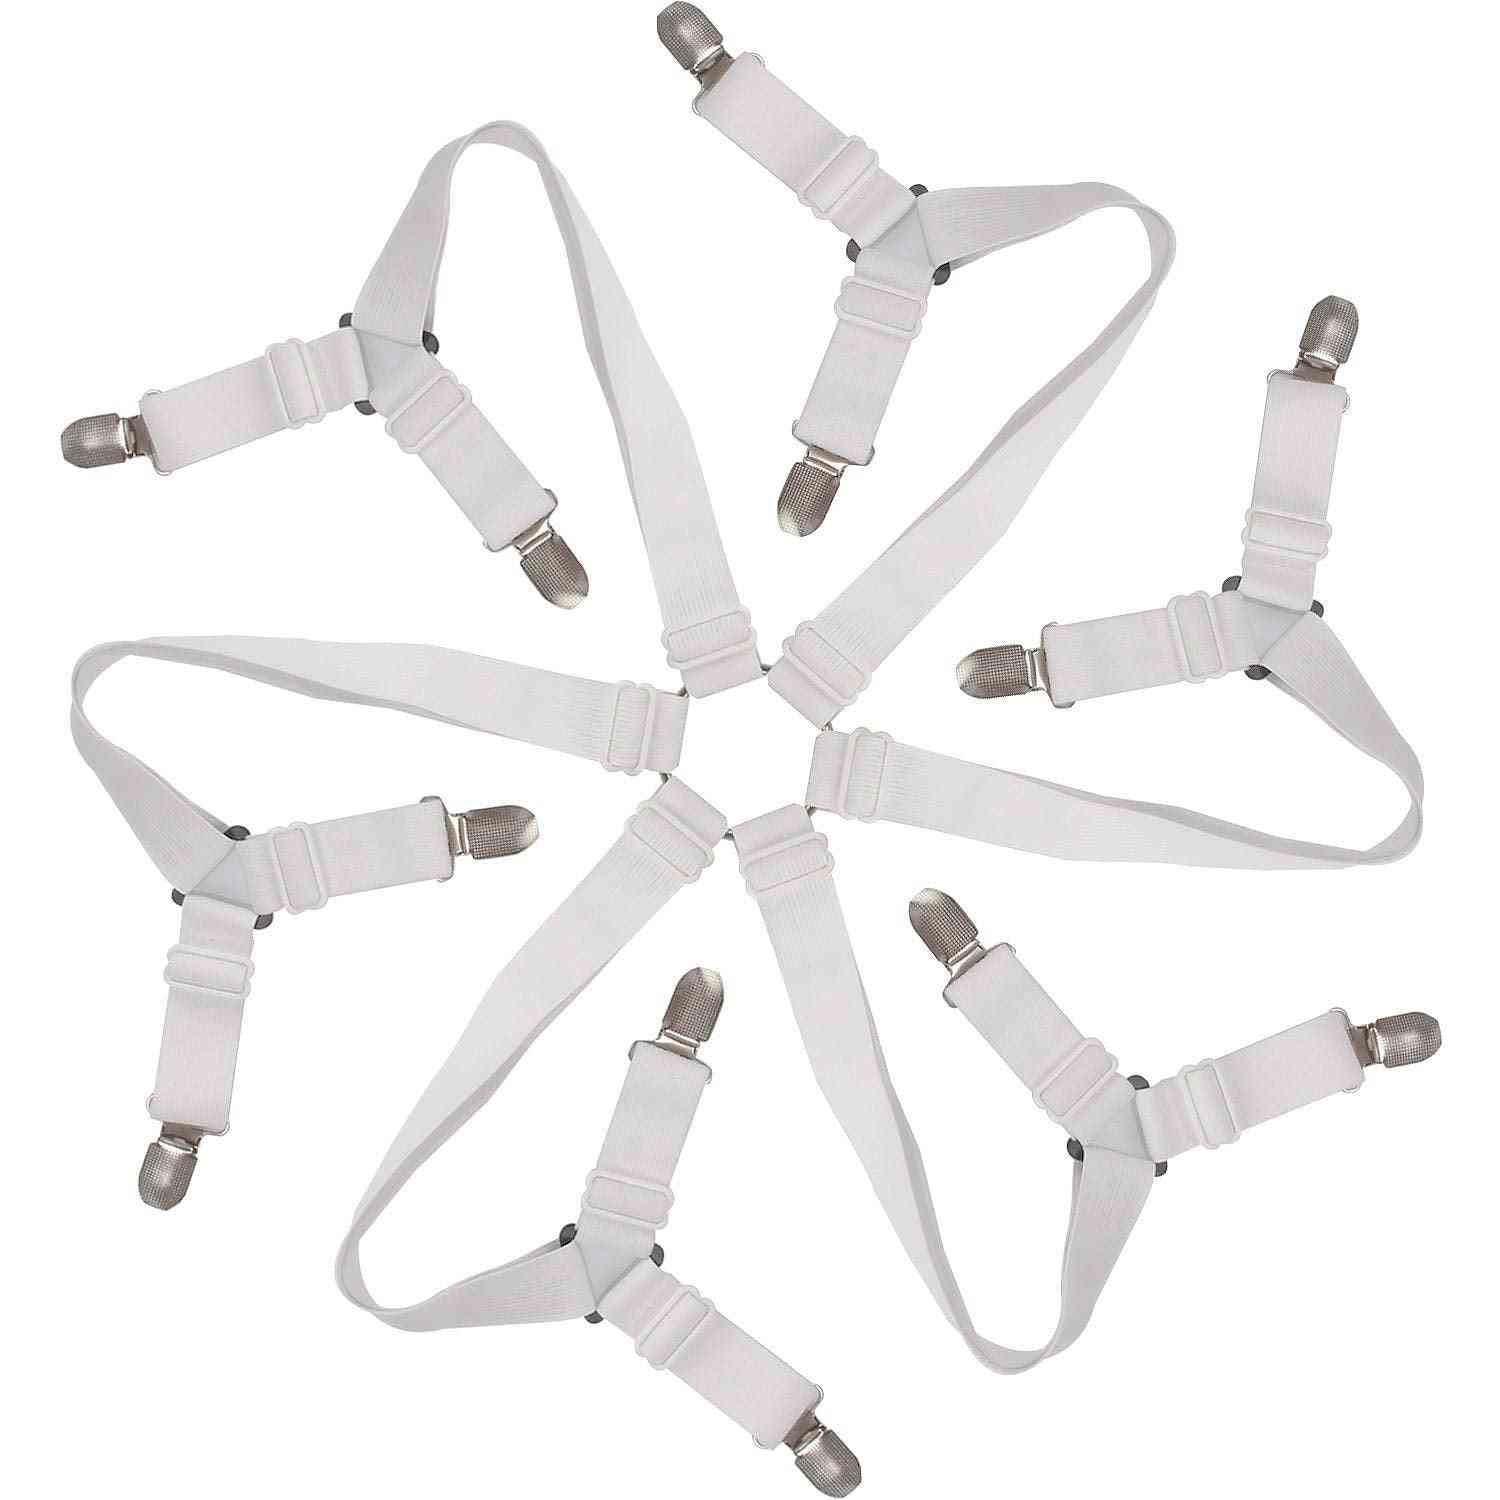 3-way & 6-sides Bed Sheet Clips, Grippers Fasteners, Strap Holders (white)